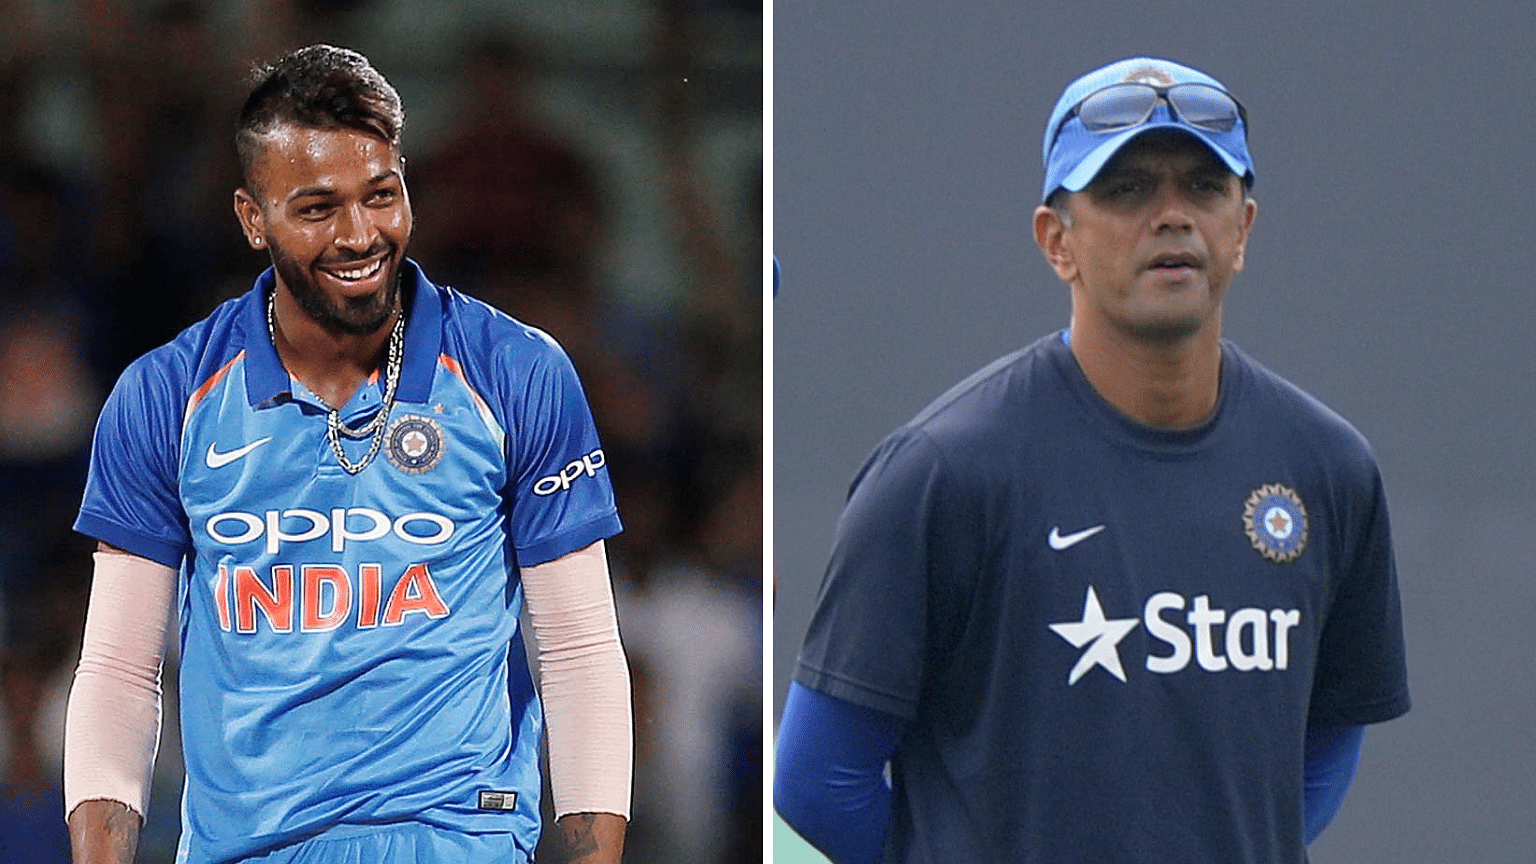 India A coach and former India captain Rahul Dravid has said there is a need to not overreact on the Pandya-Rahul issue.